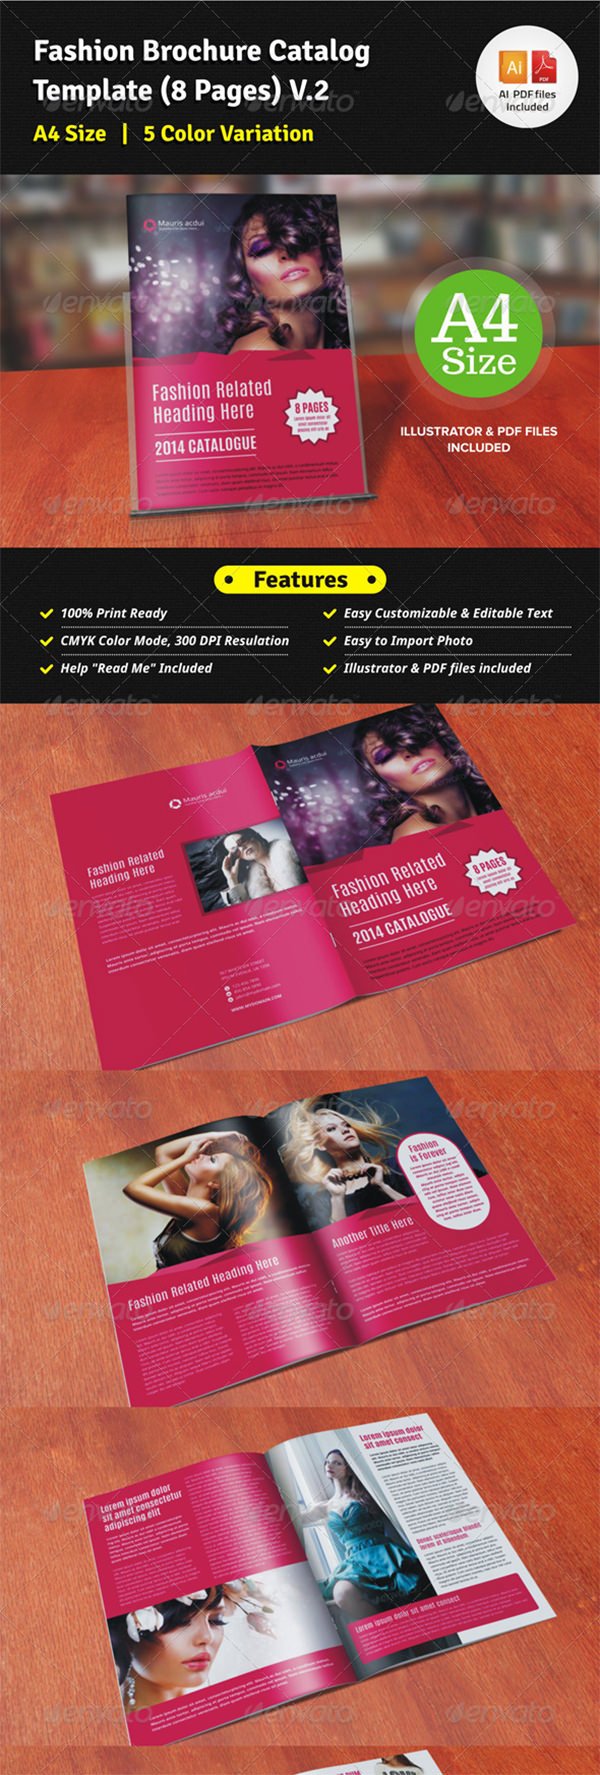 fashion brochure catalog template 12 pages v